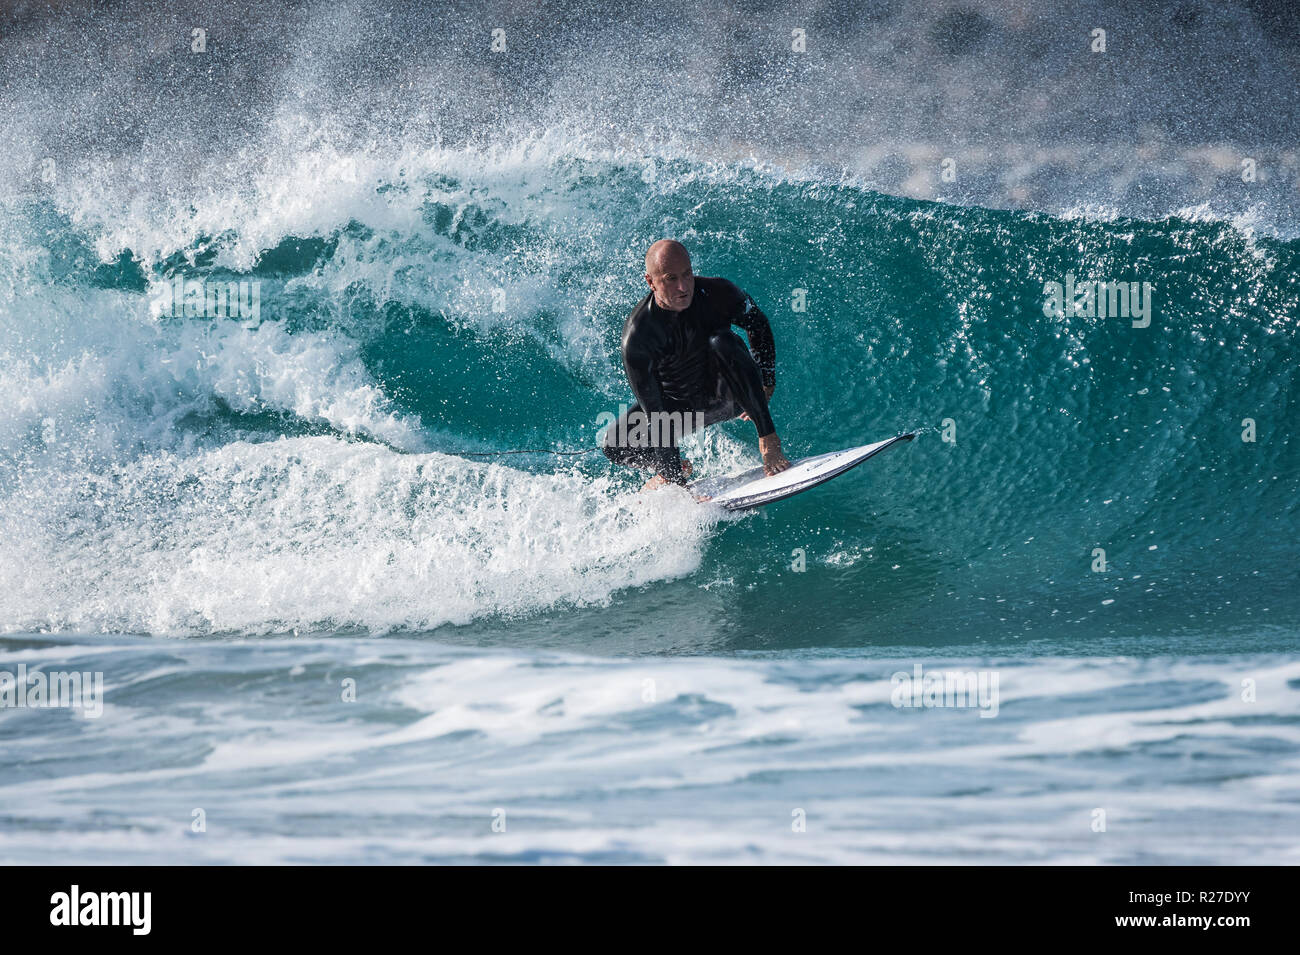 Surfer in action. Stock Photo